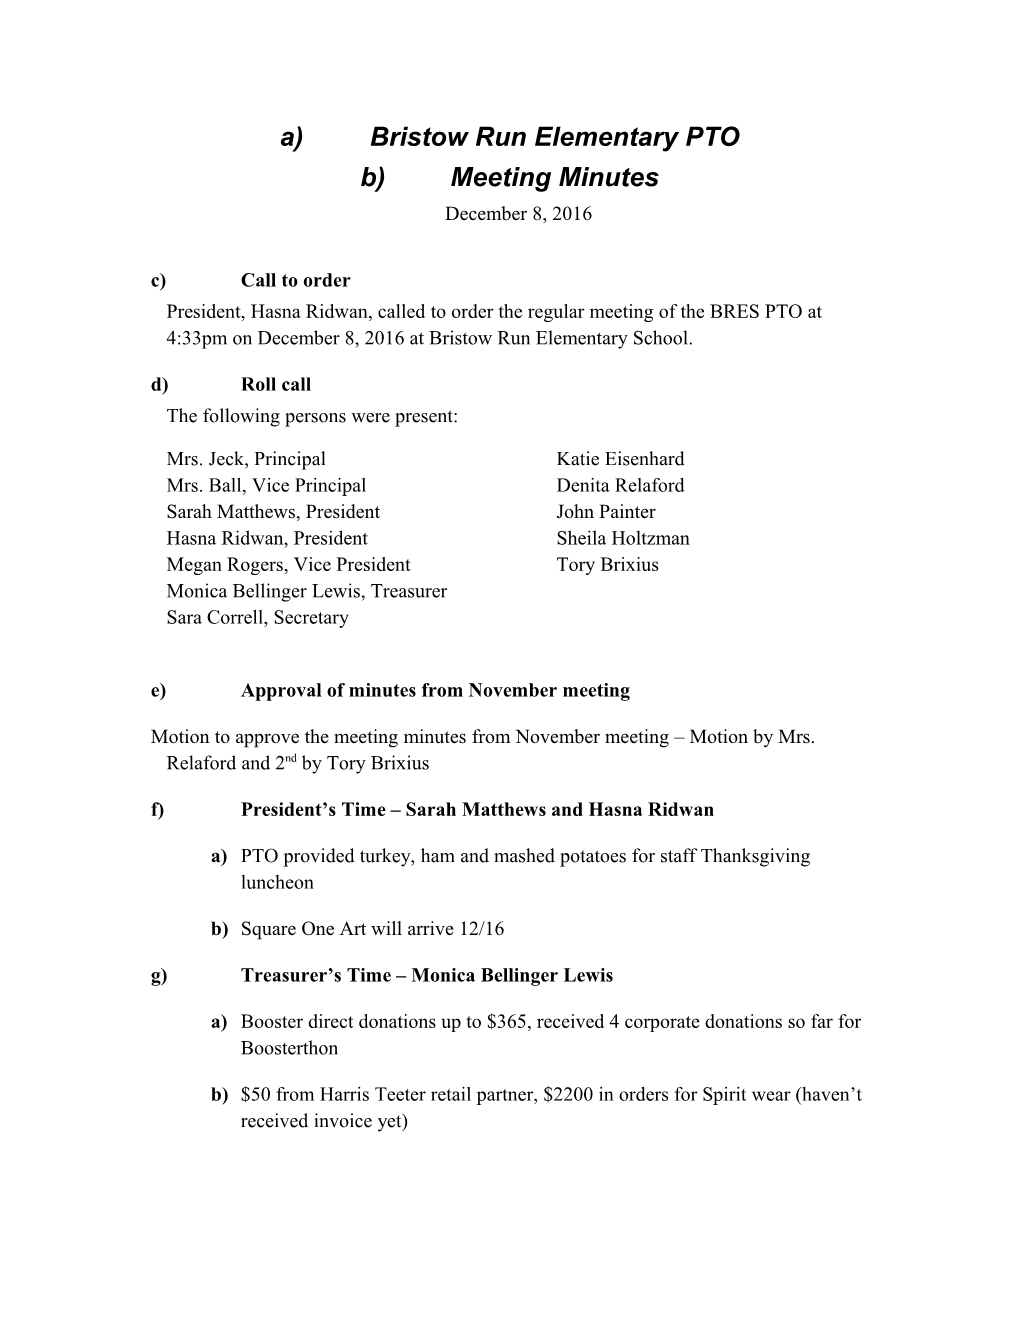 Formal Meeting Minutes s1